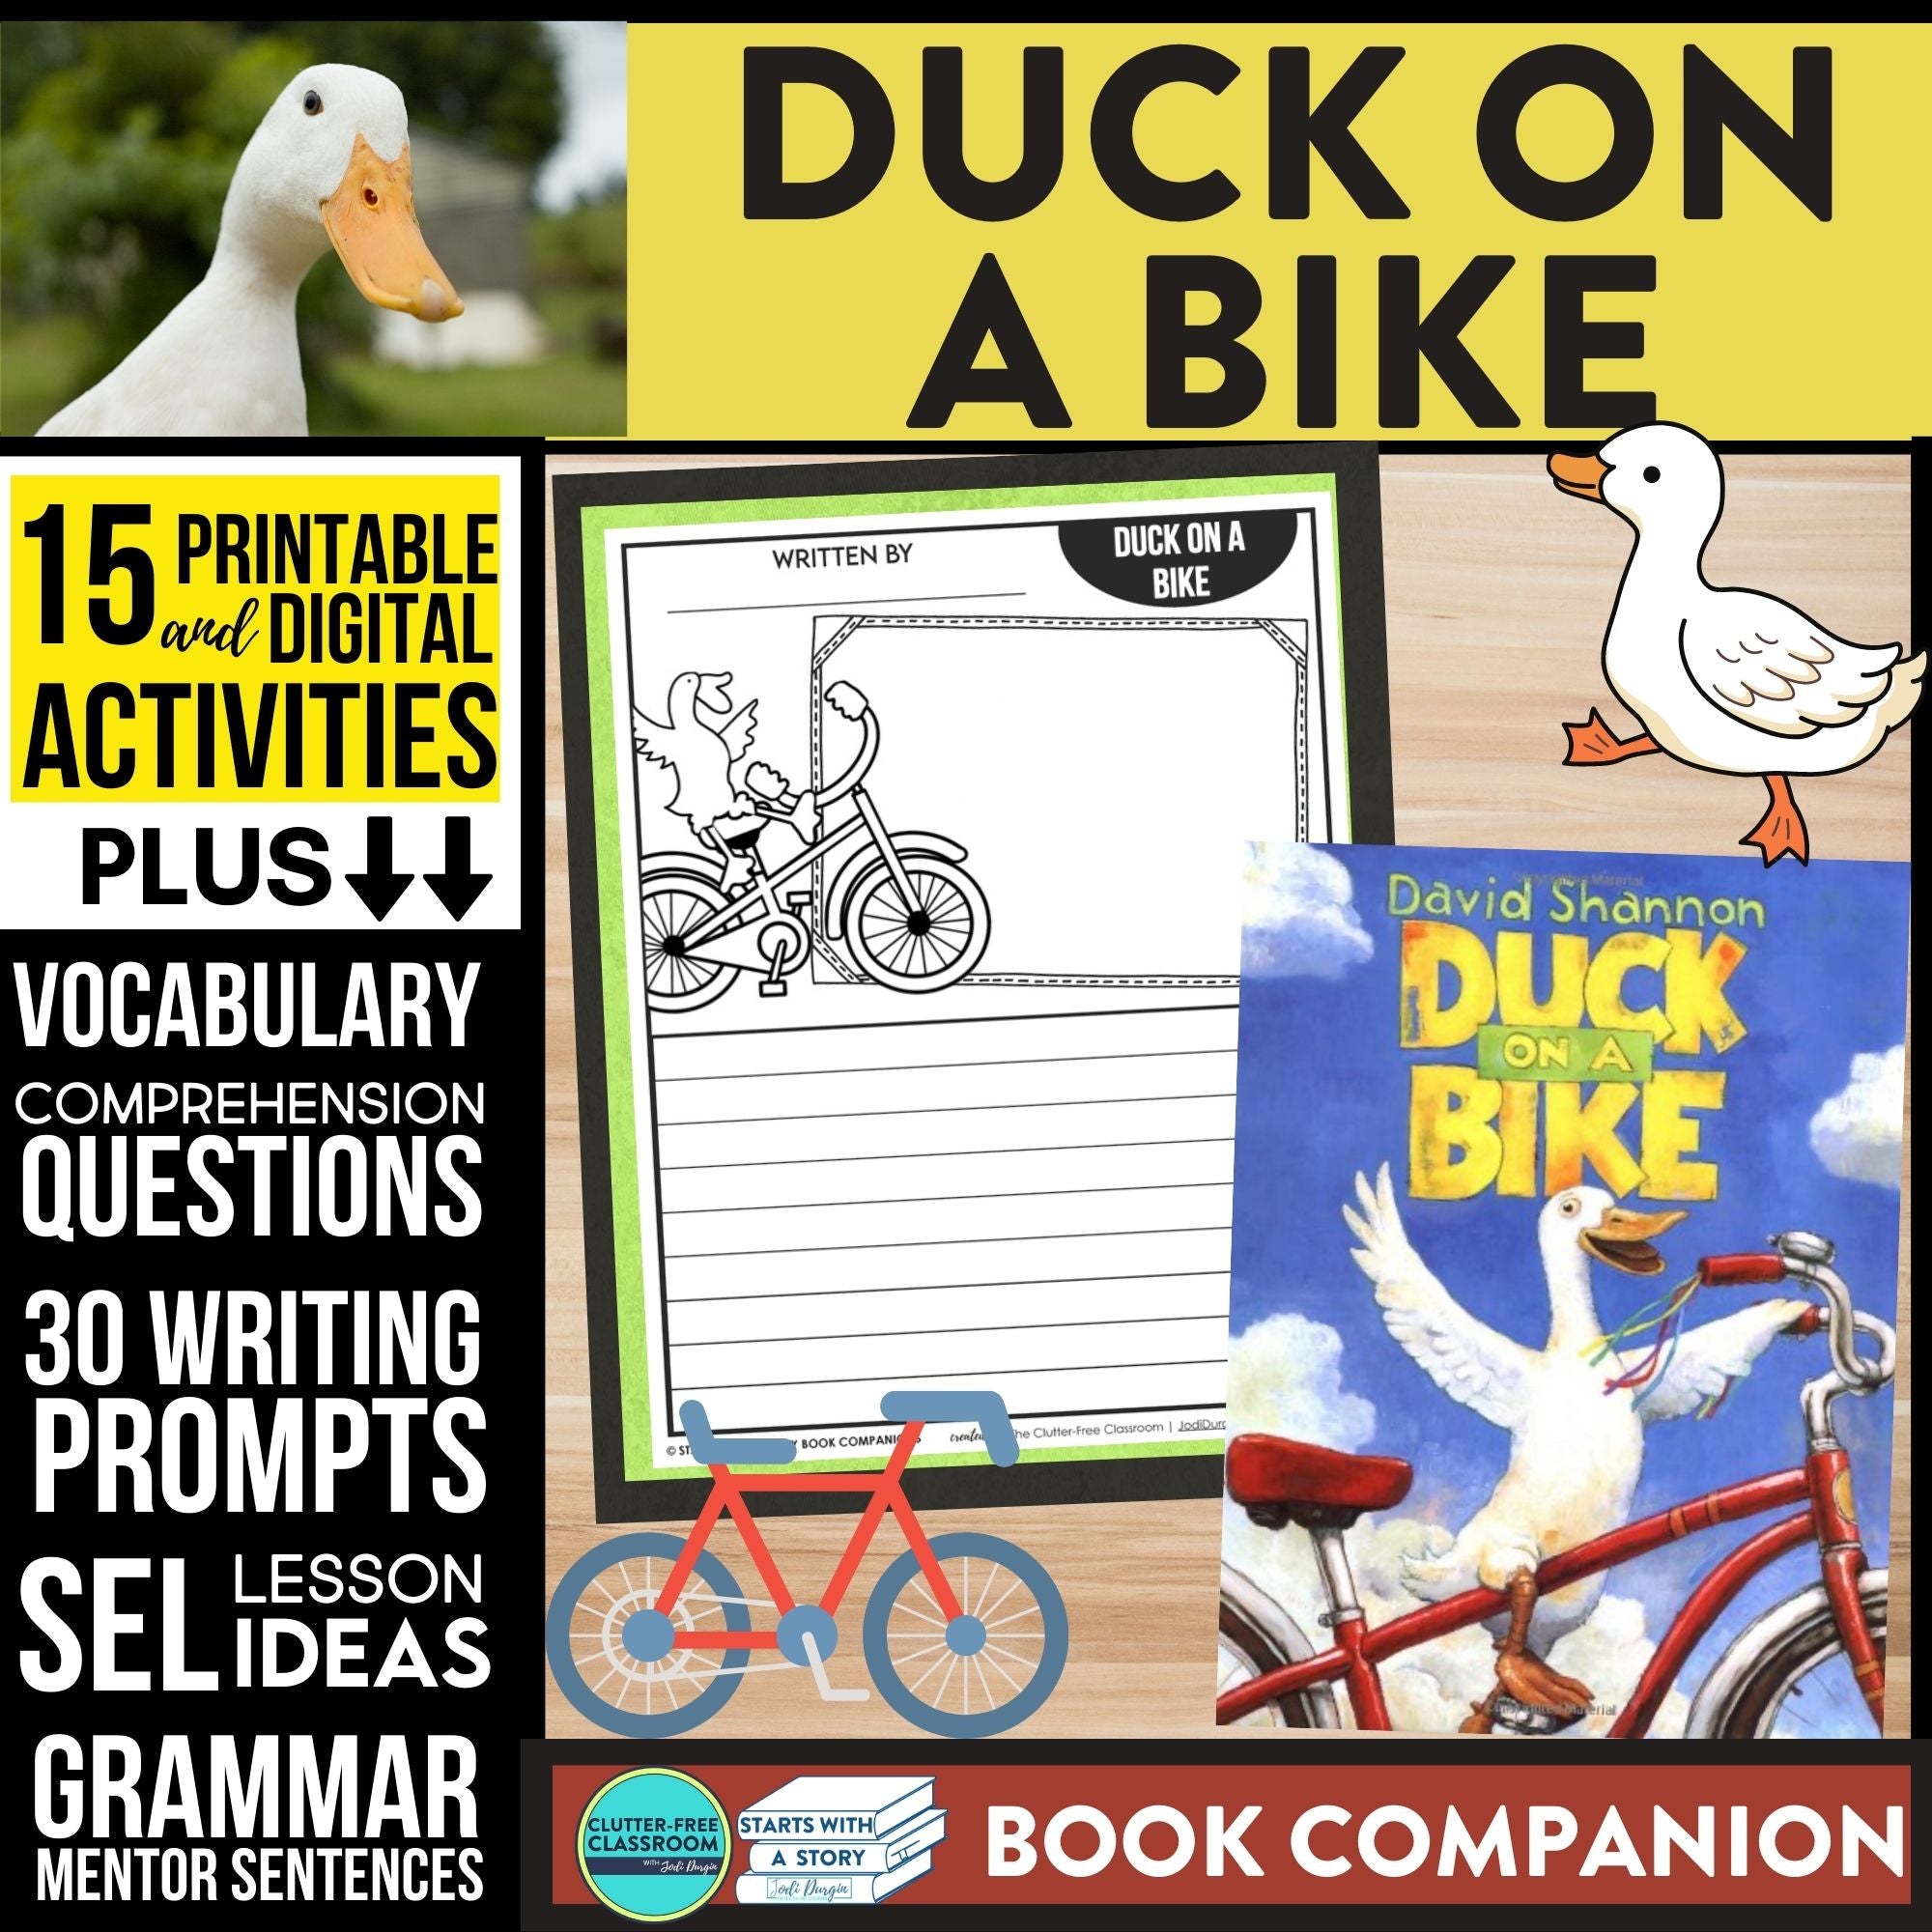 DUCK ON A BIKE activities and lesson plan ideas